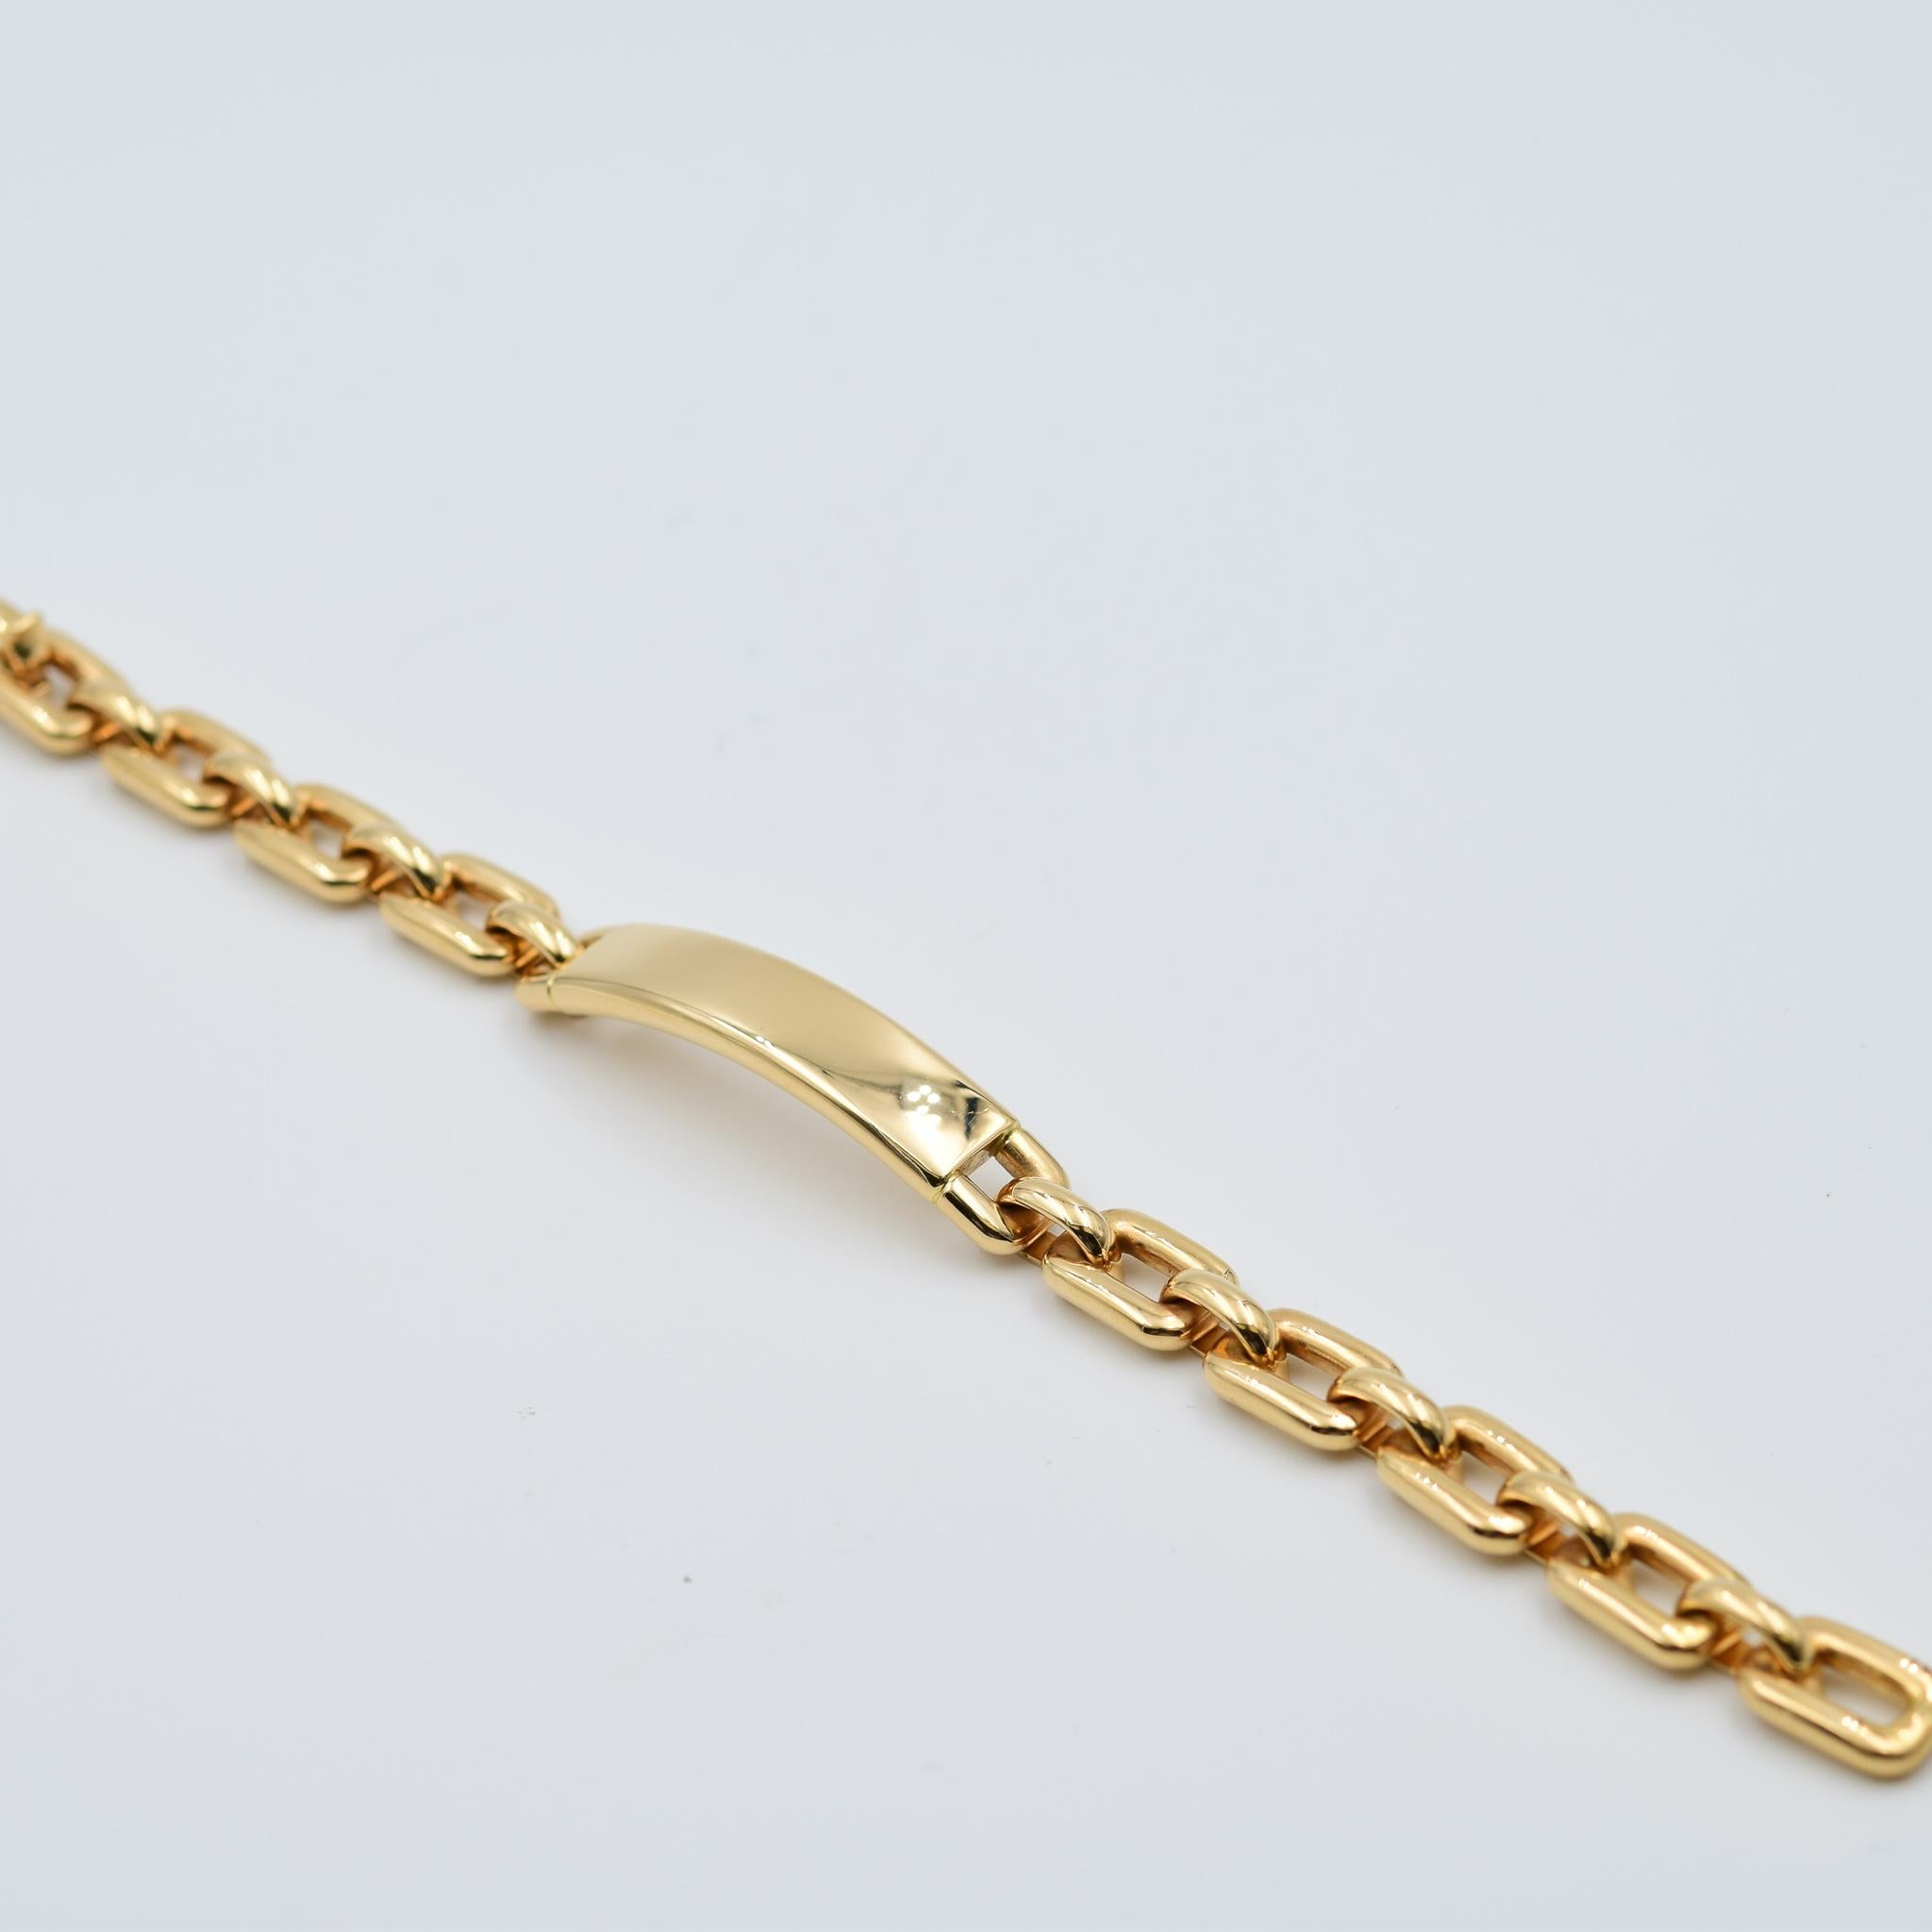 This Chunky Chain bracelet has a squared link design in 18k rose gold.  The bracelet is 7.75